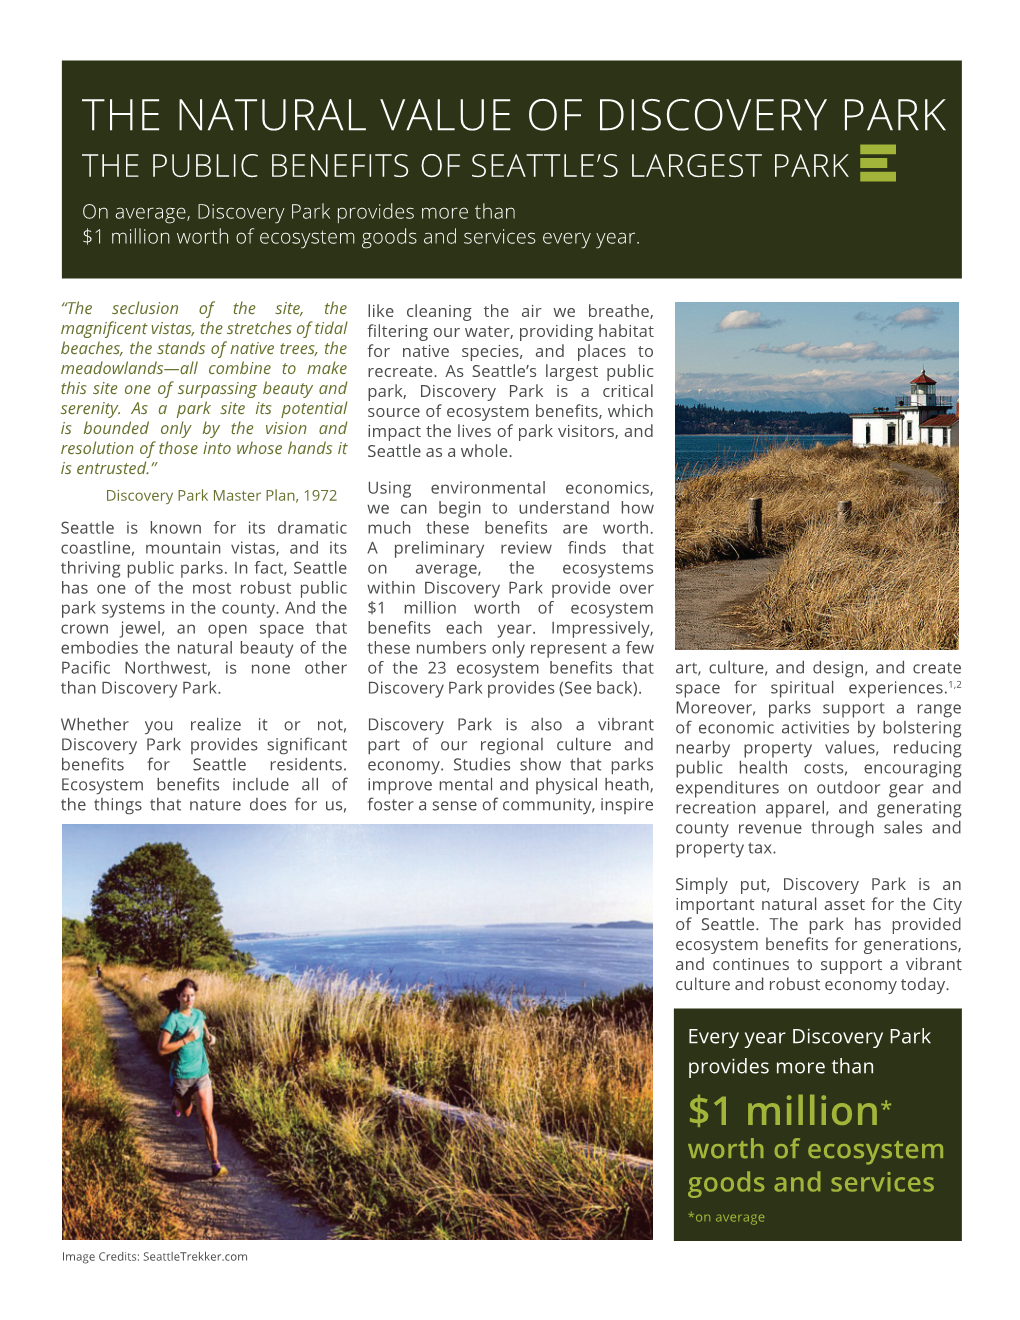 The Natural Value of Discovery Park